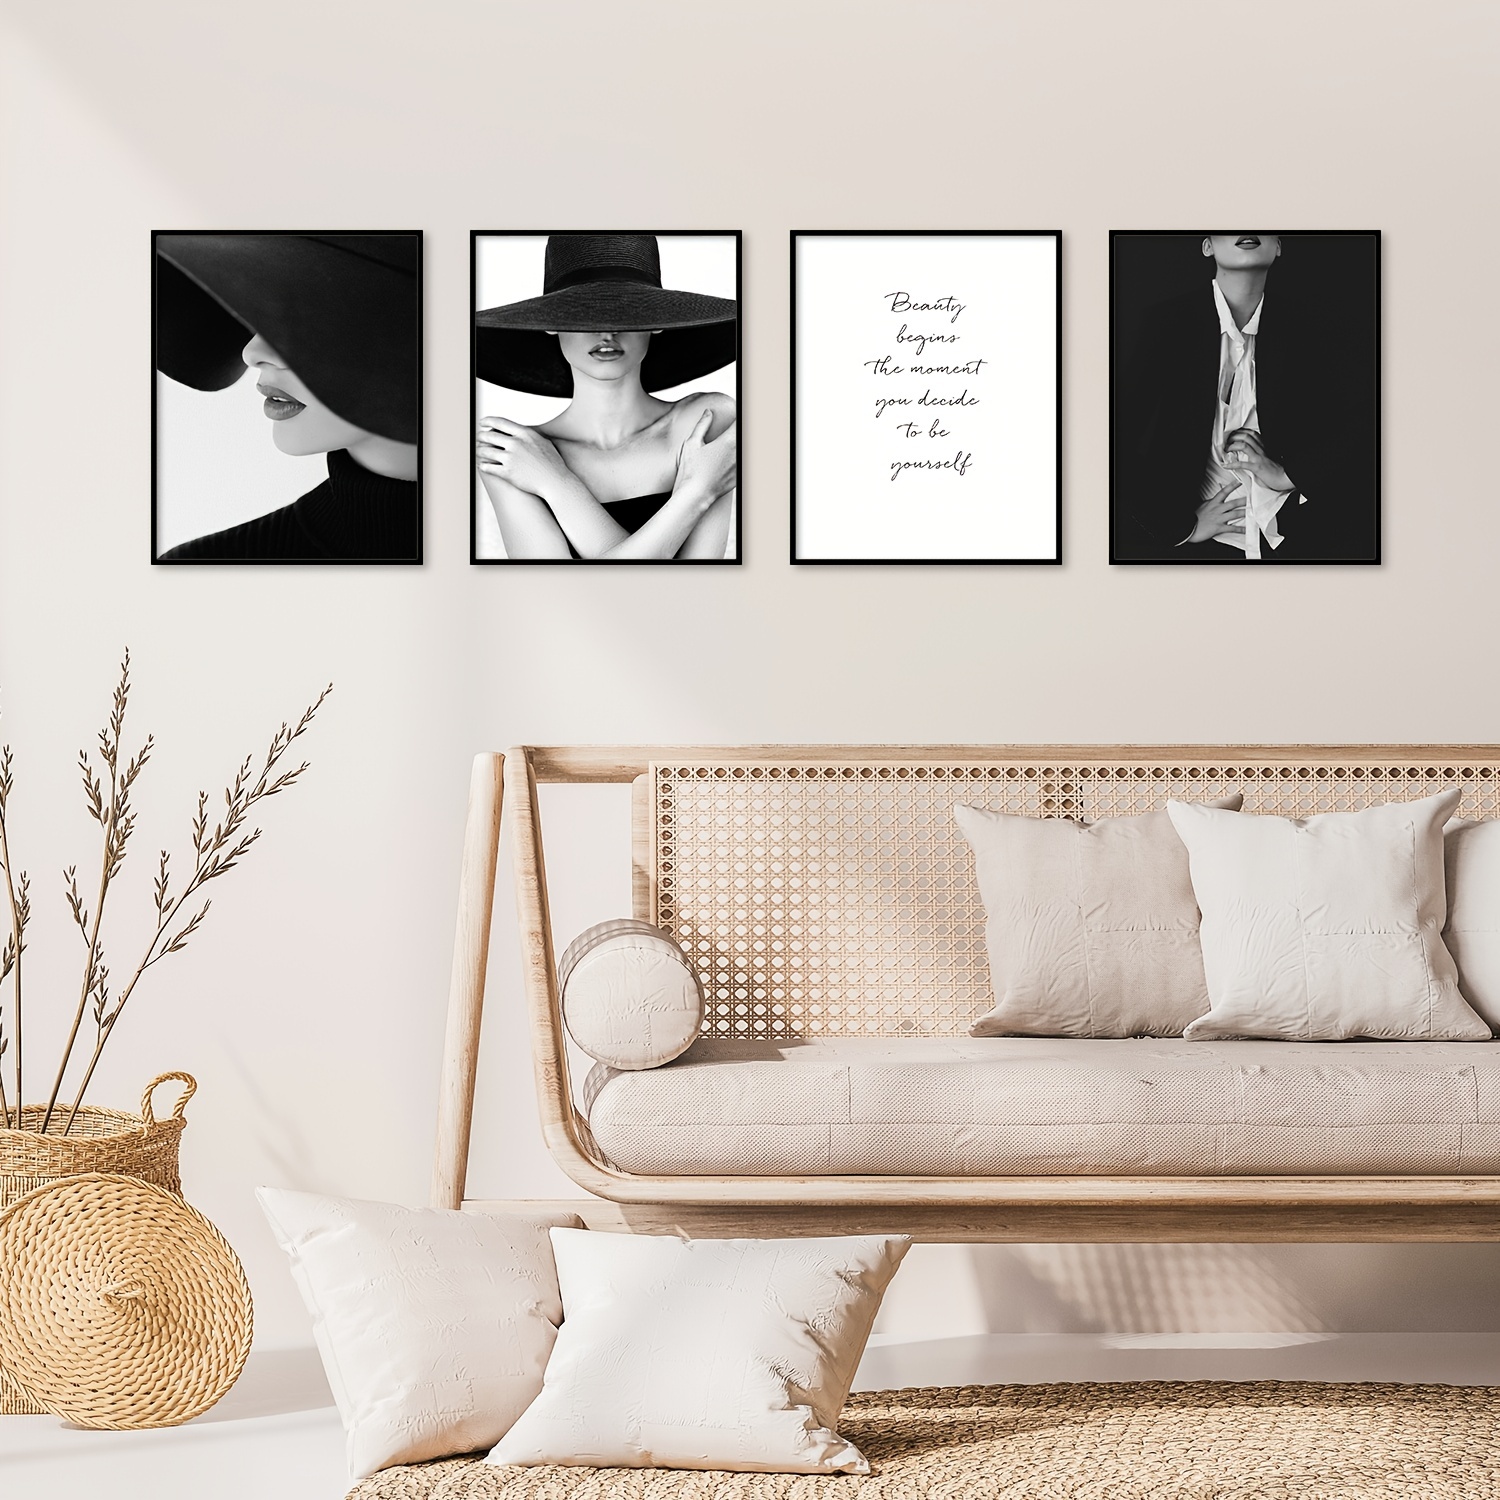 HoozGee Fashion Wall Art Prints Bathroom Decor Set of 6 Red Glam Glitter  Tissue Canvas Posters Pictures Photos Bathroom Artwork Wall Black and White